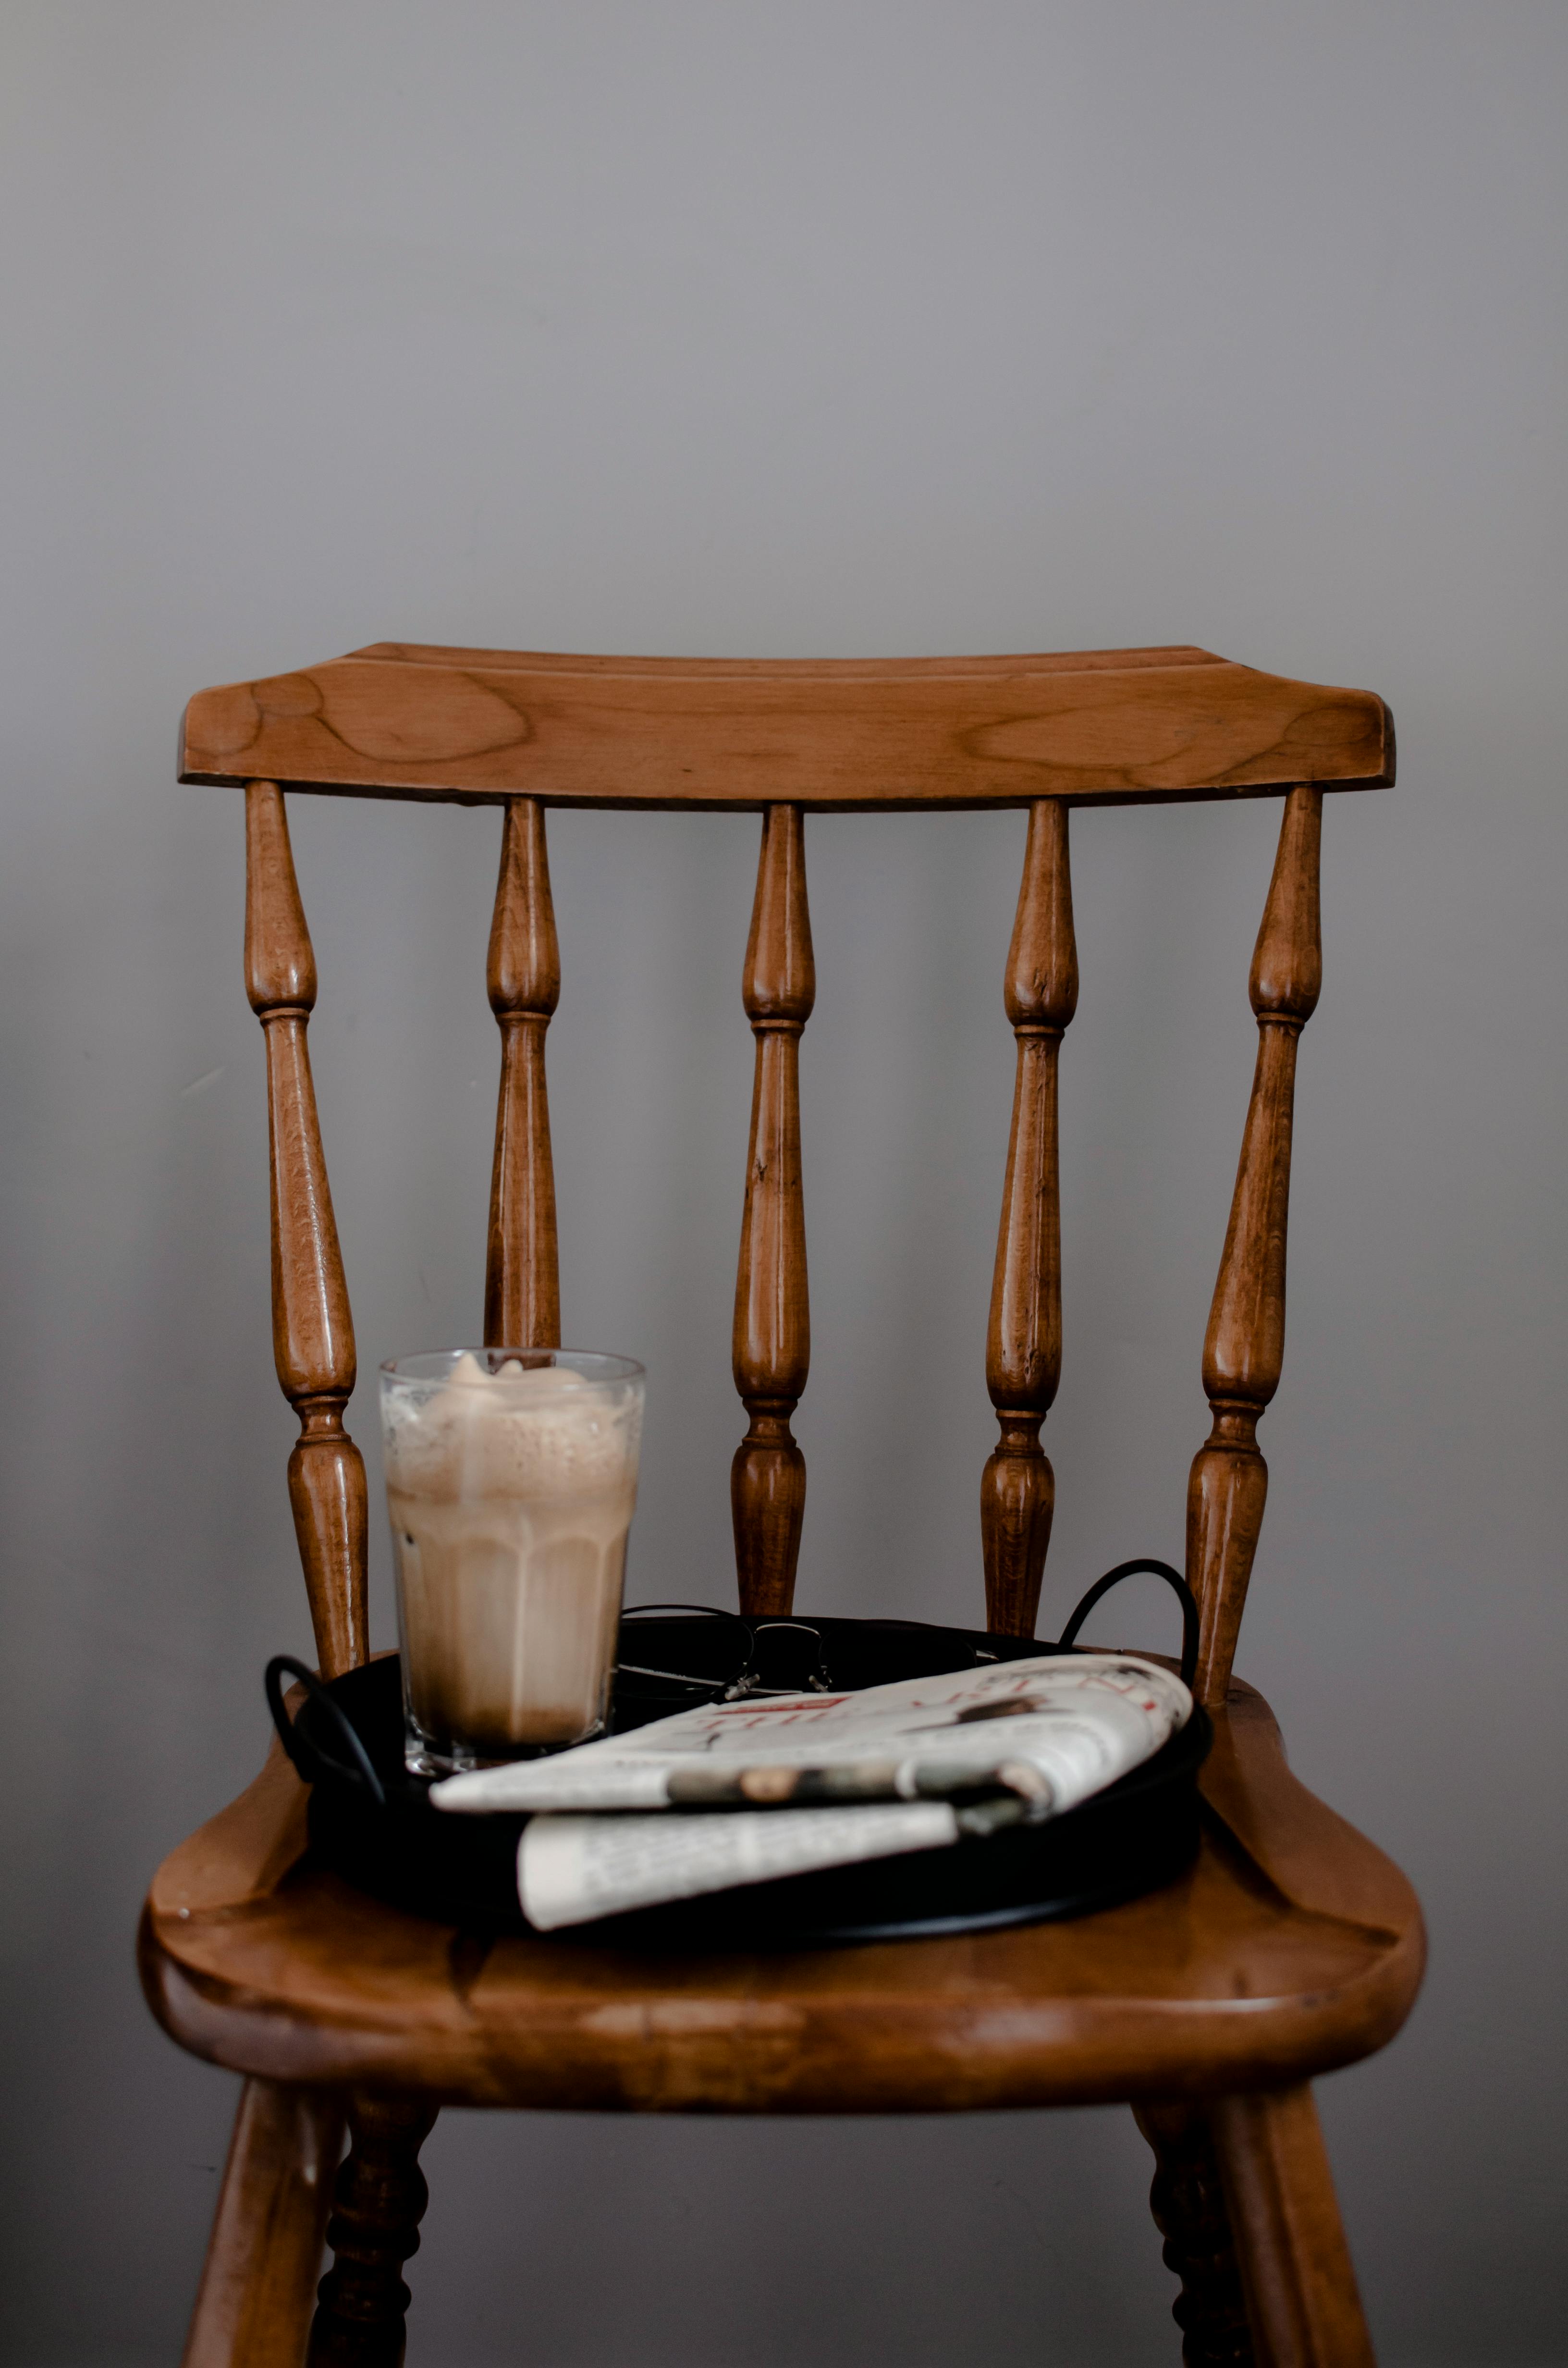 newspaper and coffee placed on wooden chair against gray background